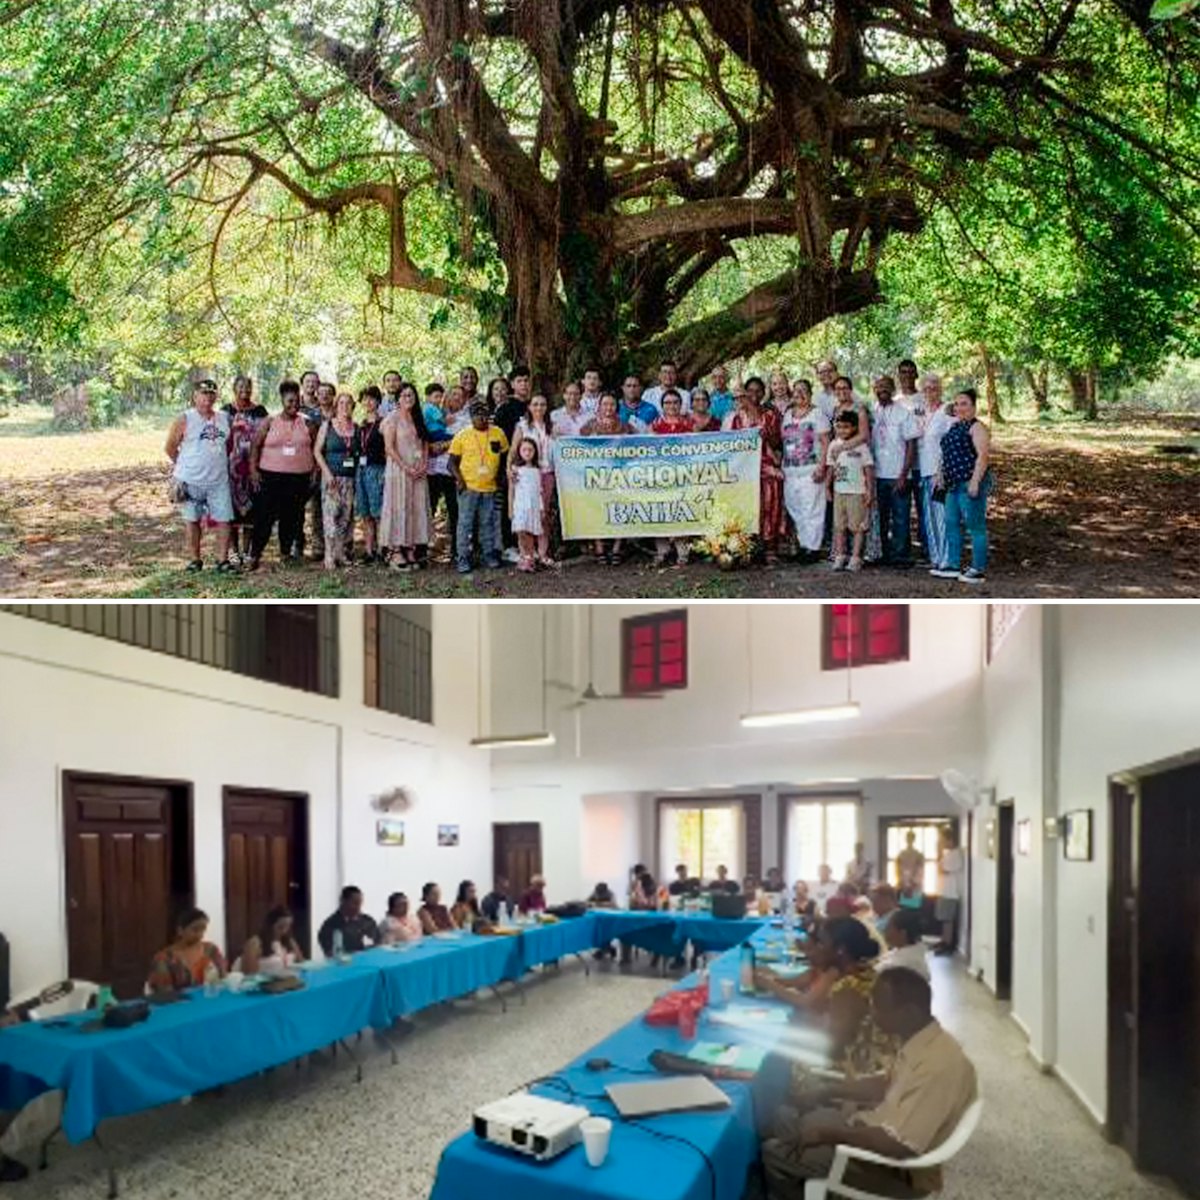 Delegates were uplifted with a renewed determination to contribute in their communities to promoting a materially and spiritually prosperous world after attending the 61st national convention for the Bahá’ís of Honduras.